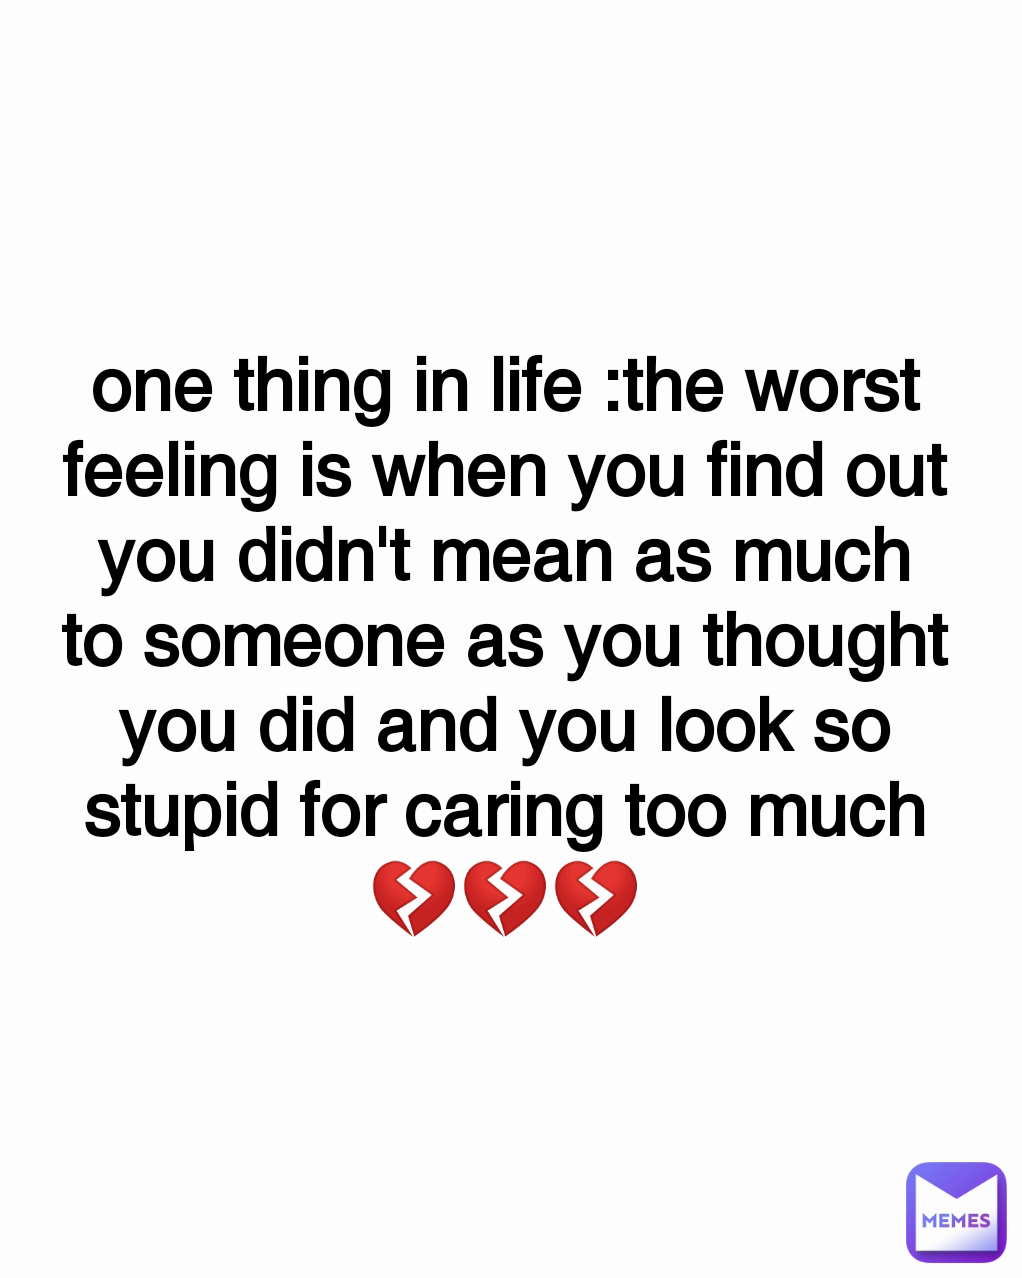 one thing in life :the worst feeling is when you find out you didn't mean as much to someone as you thought you did and you look so stupid for caring too much
💔💔💔